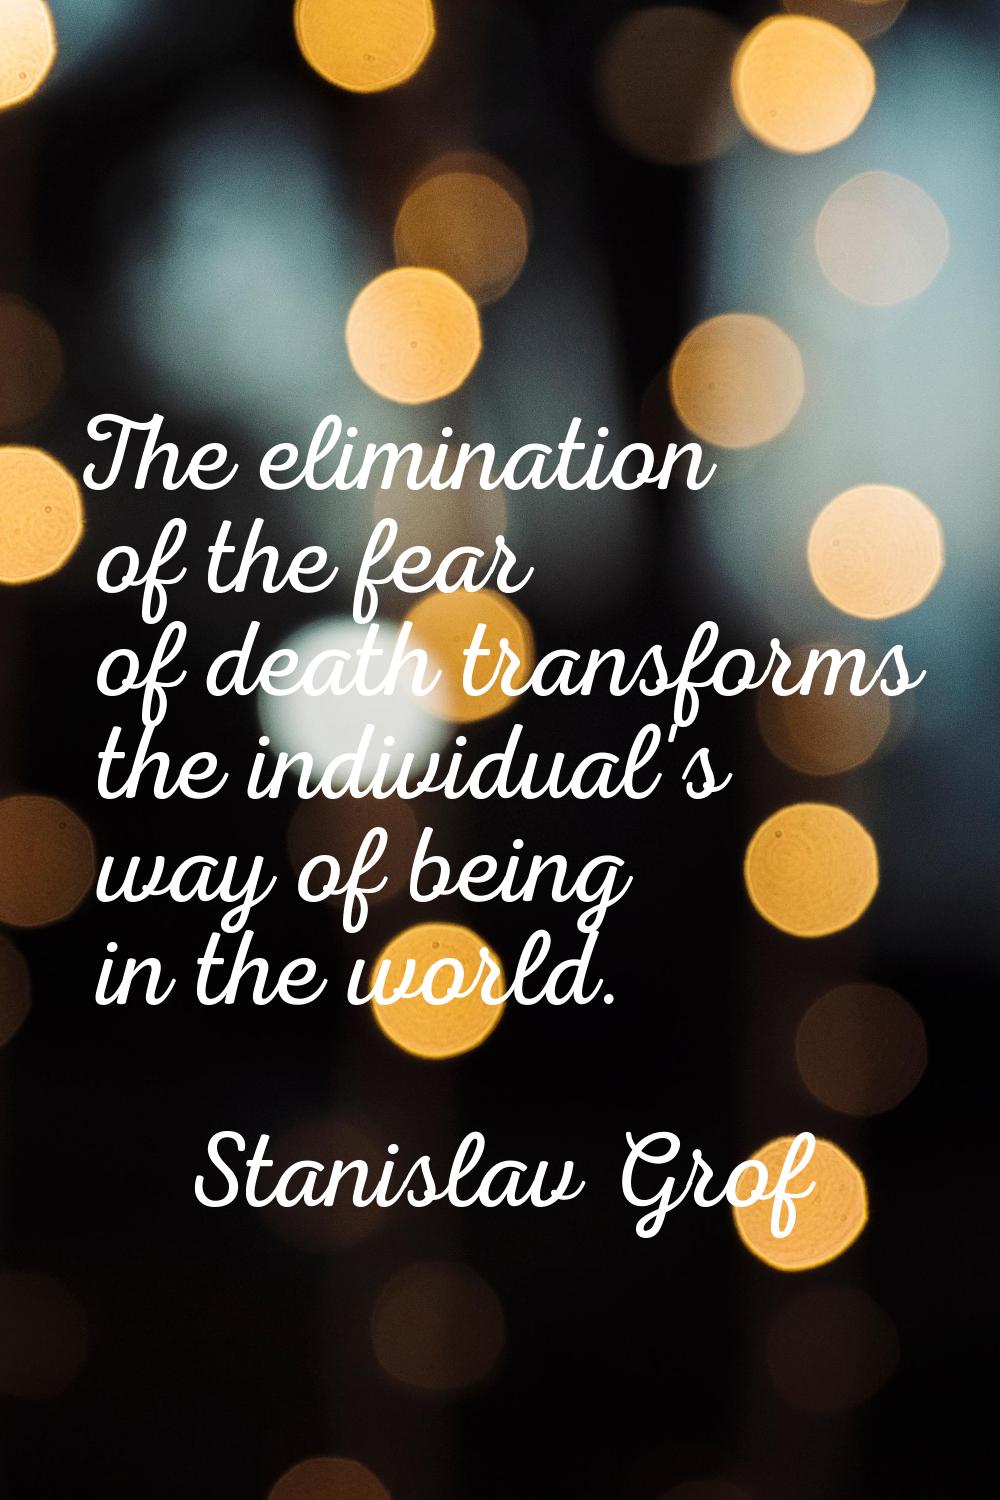 The elimination of the fear of death transforms the individual's way of being in the world.